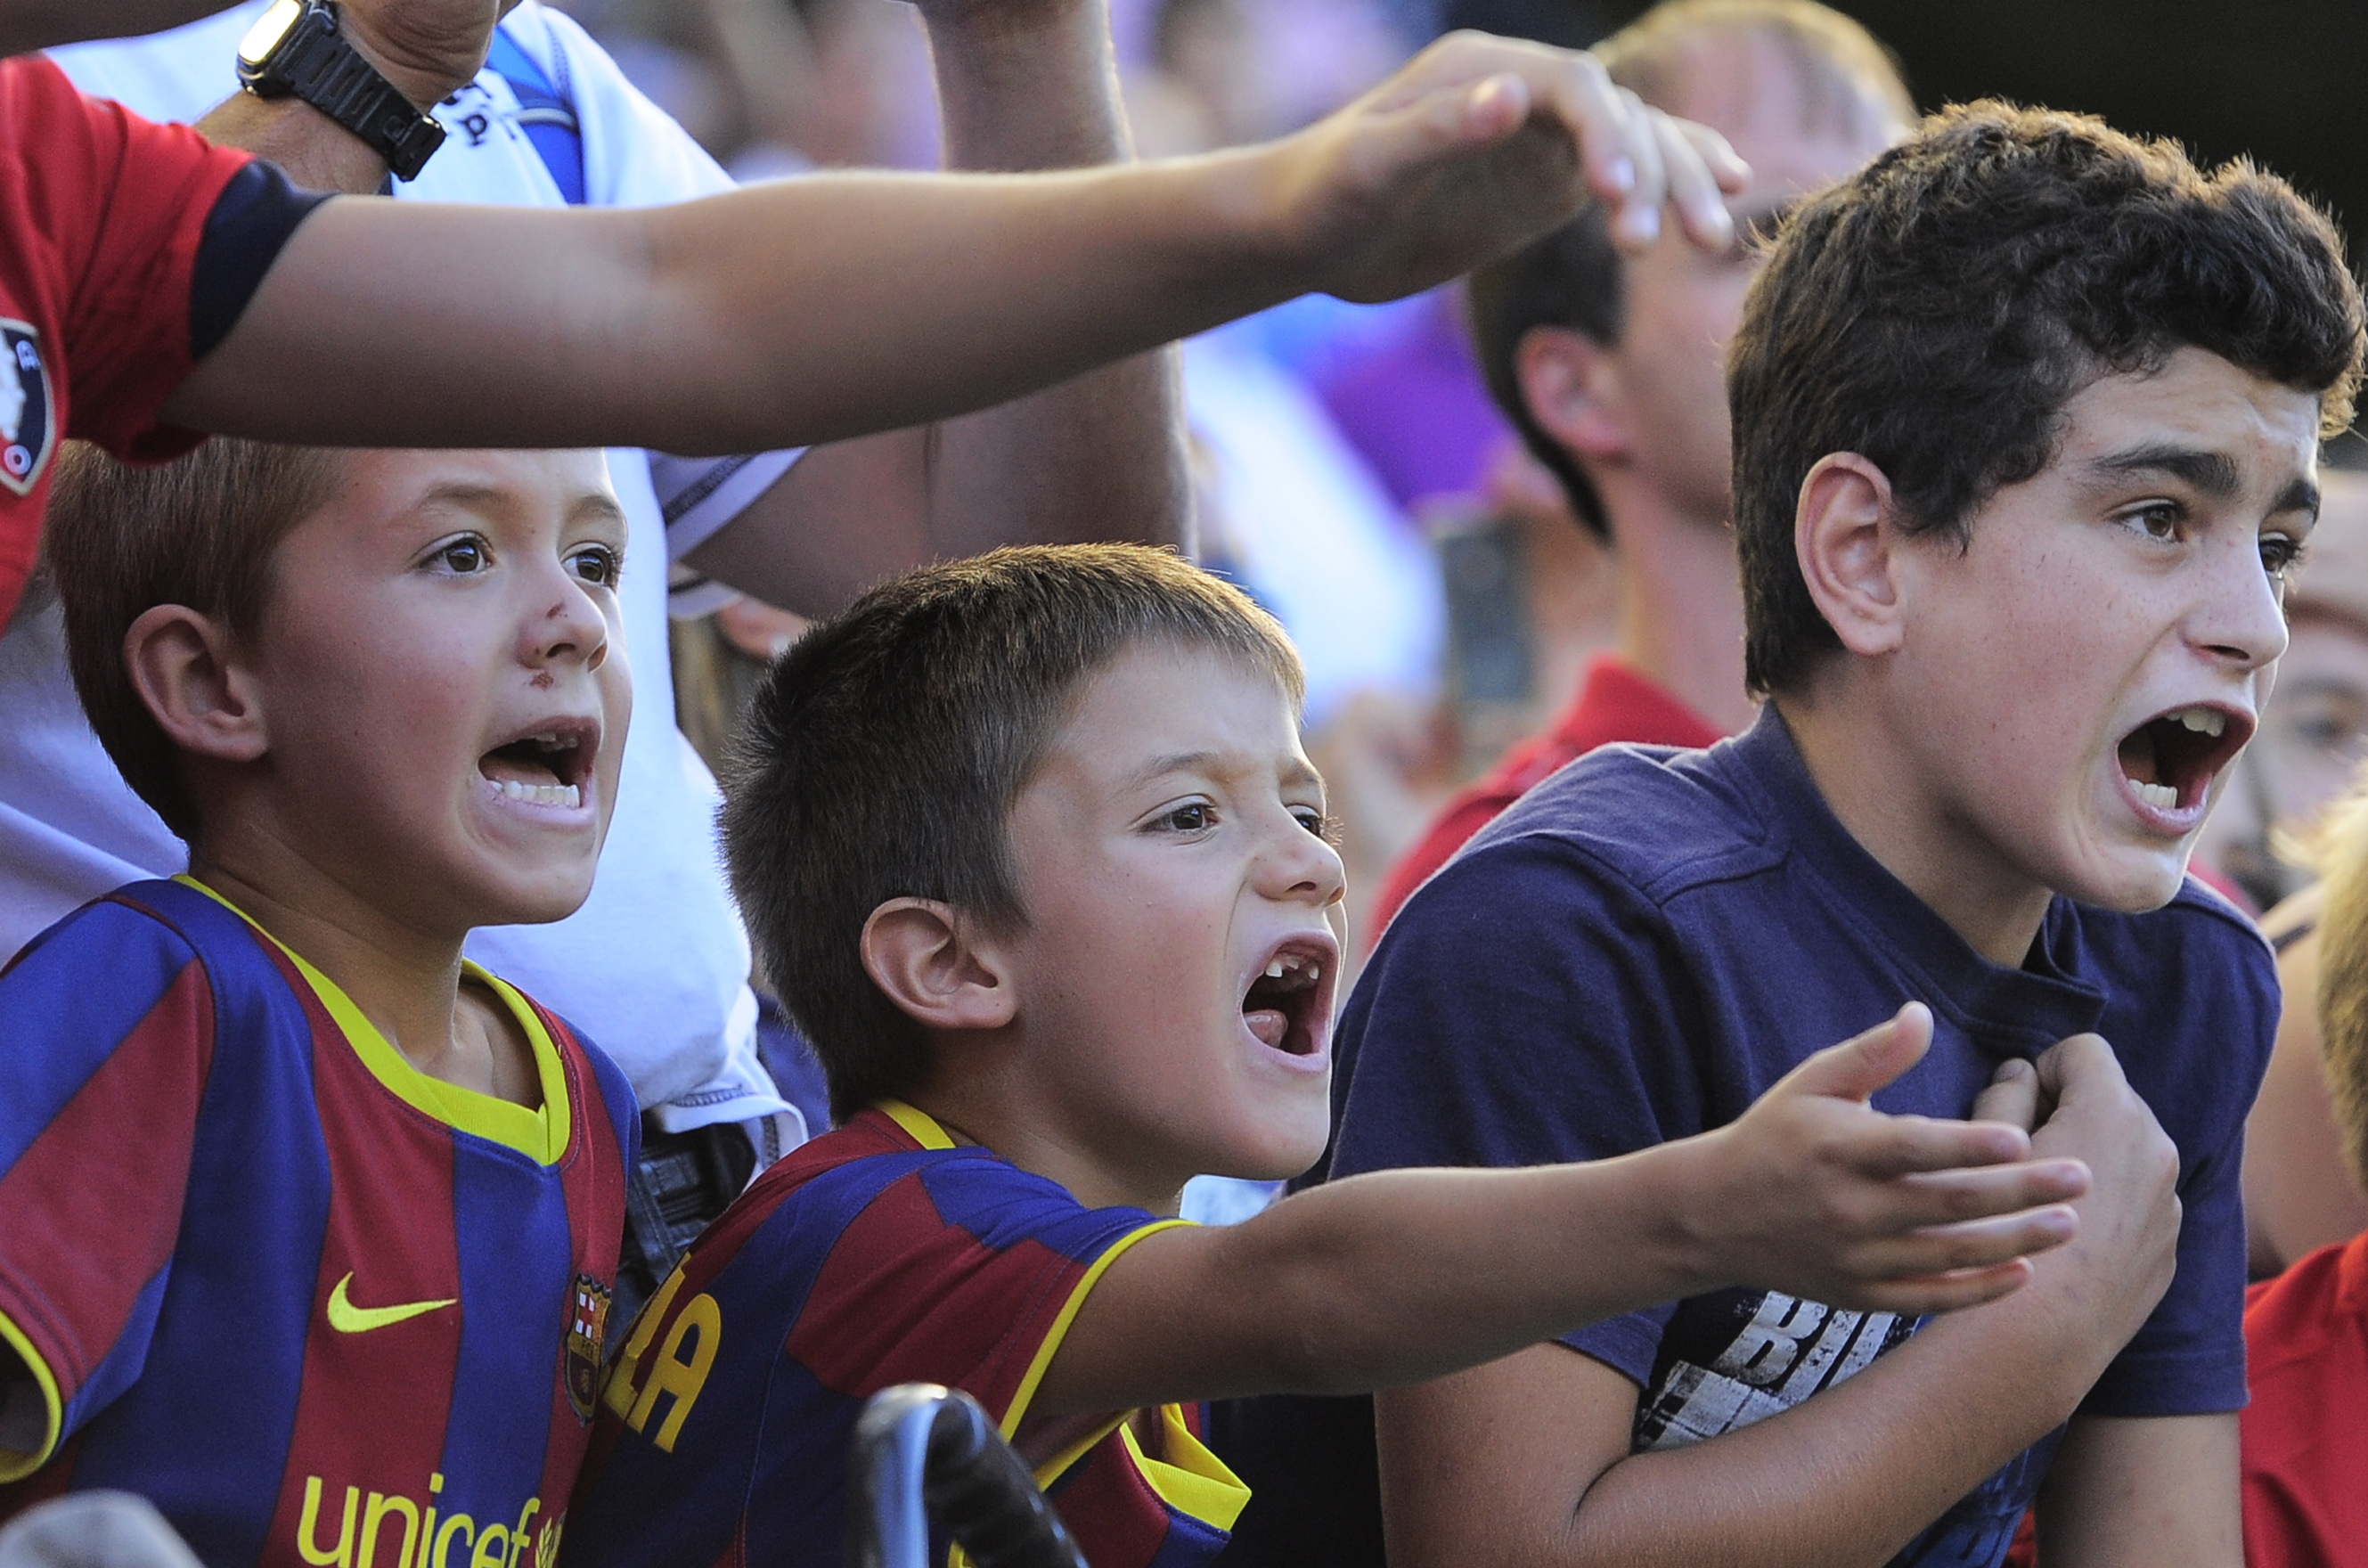 Soccer club Barcelona makes mom buy game ticket for her baby - CBS News